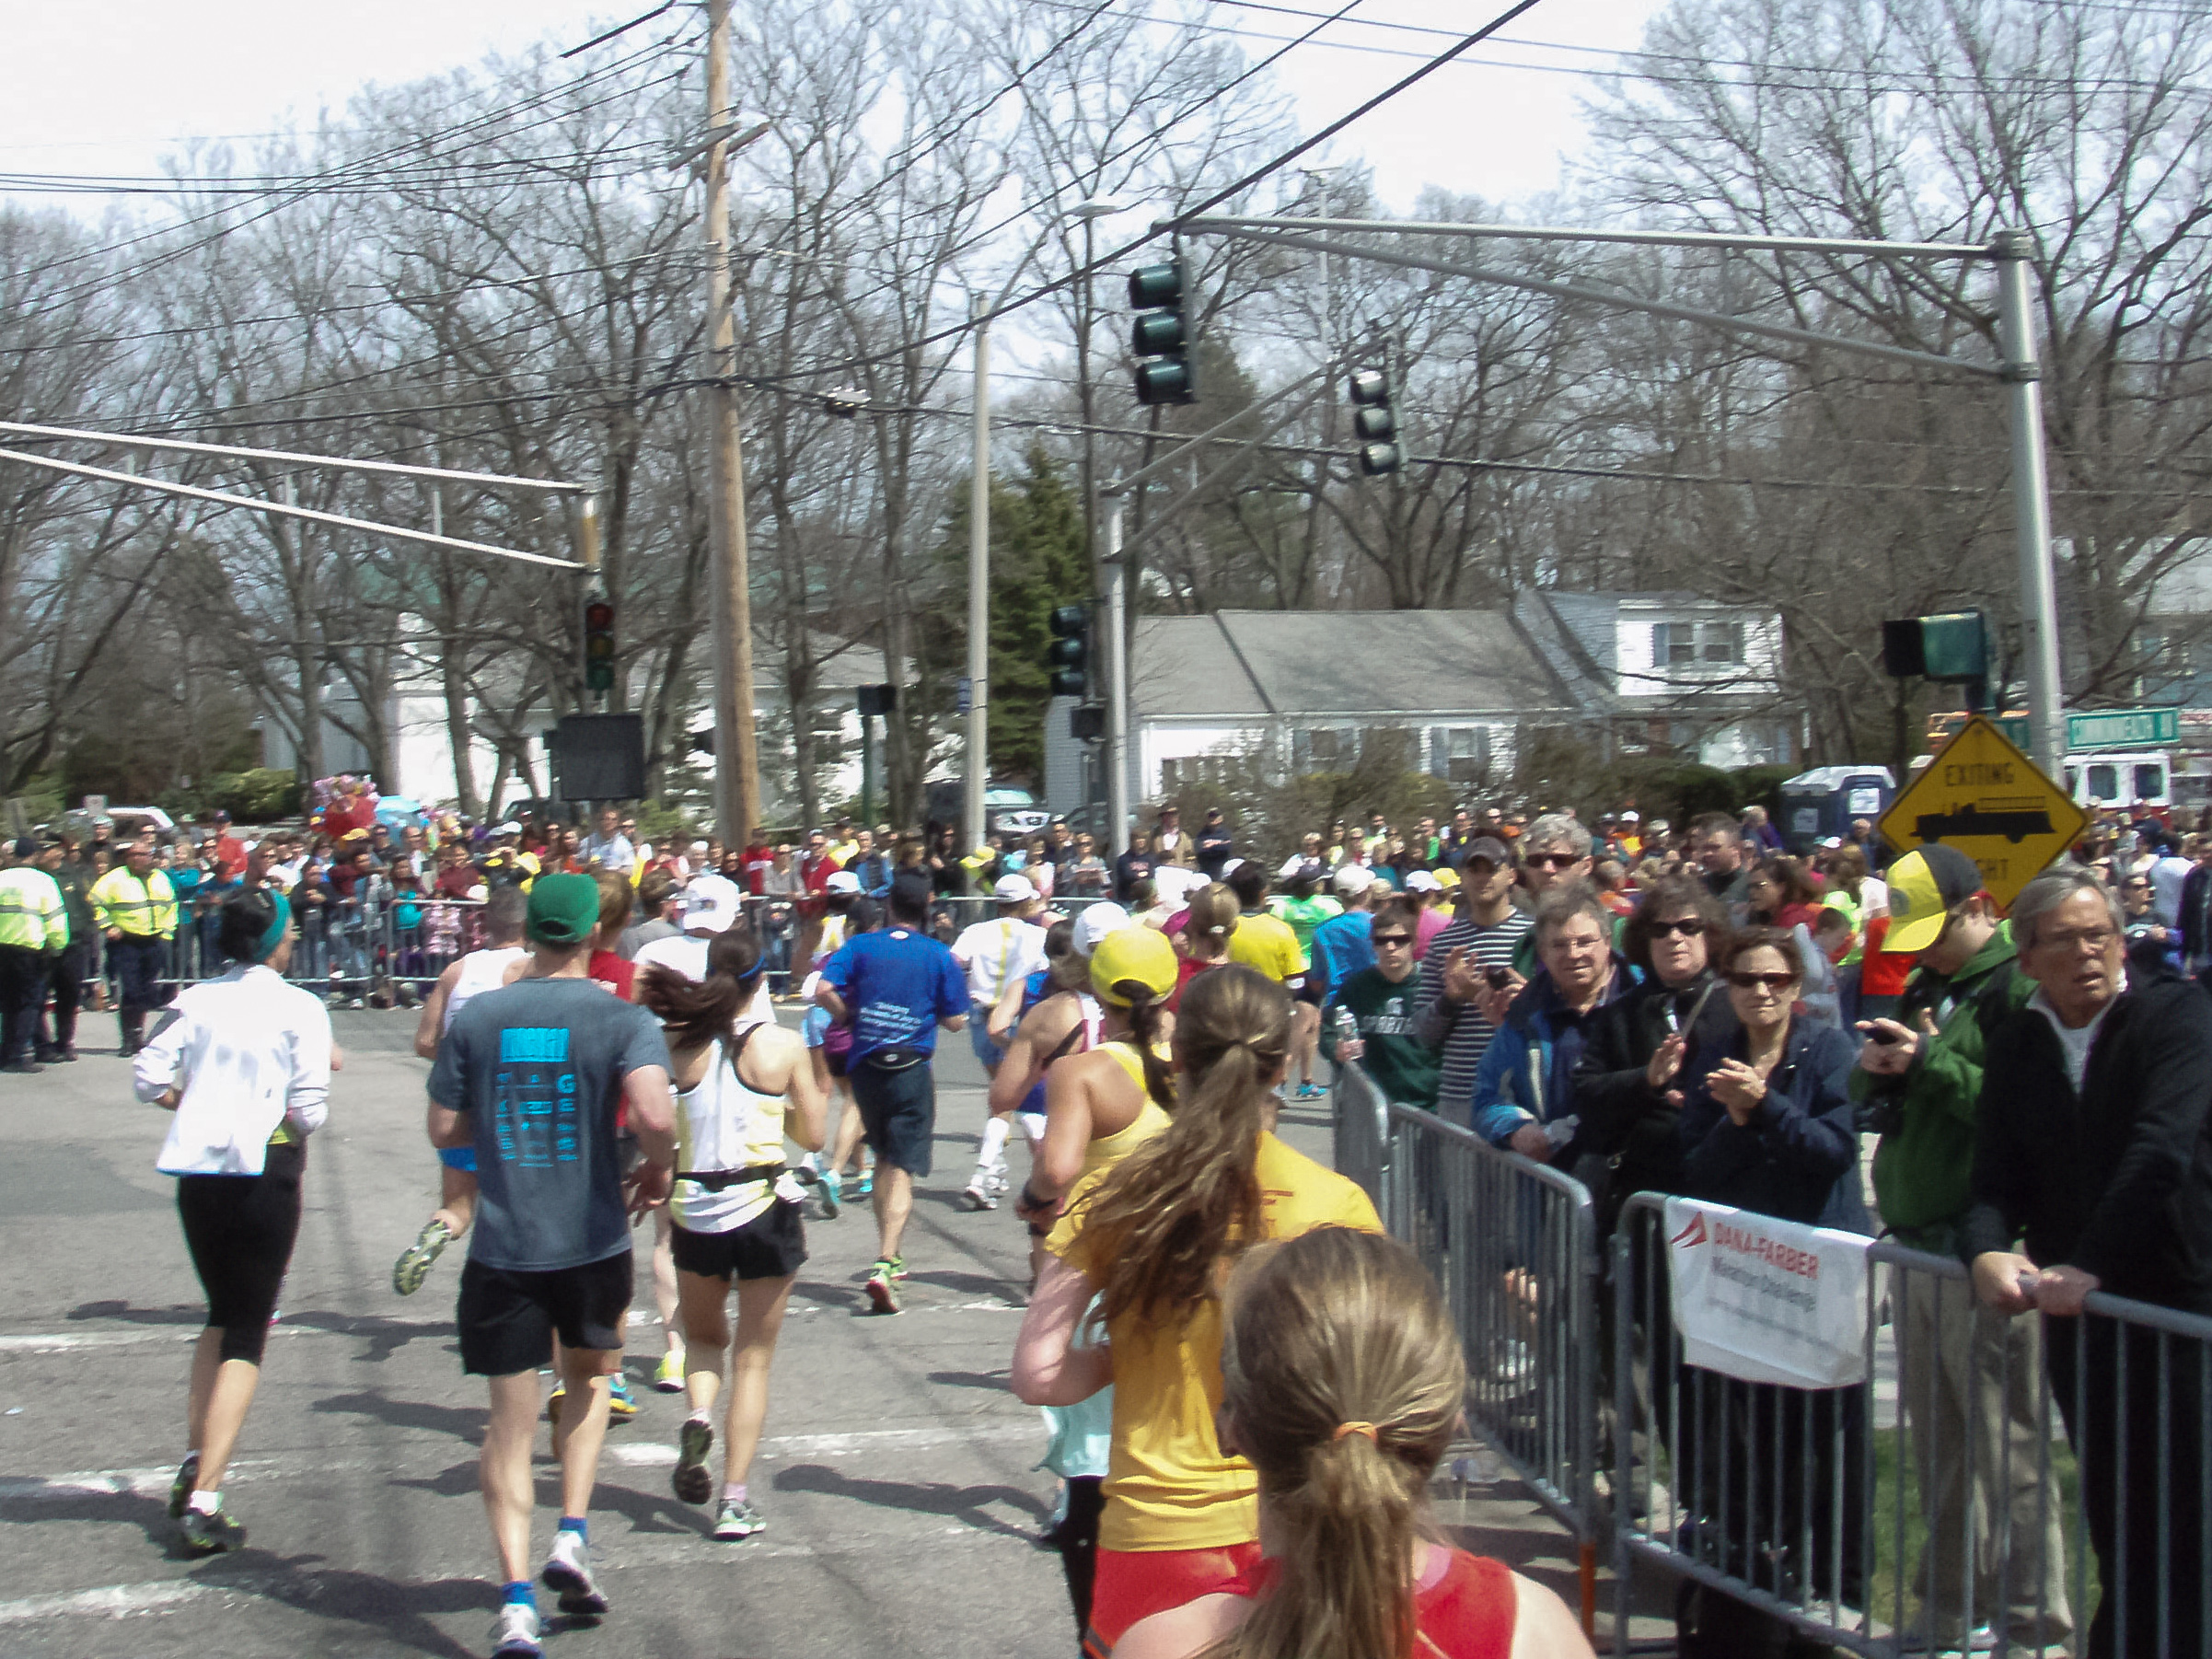 The first turn on the course near mile 17